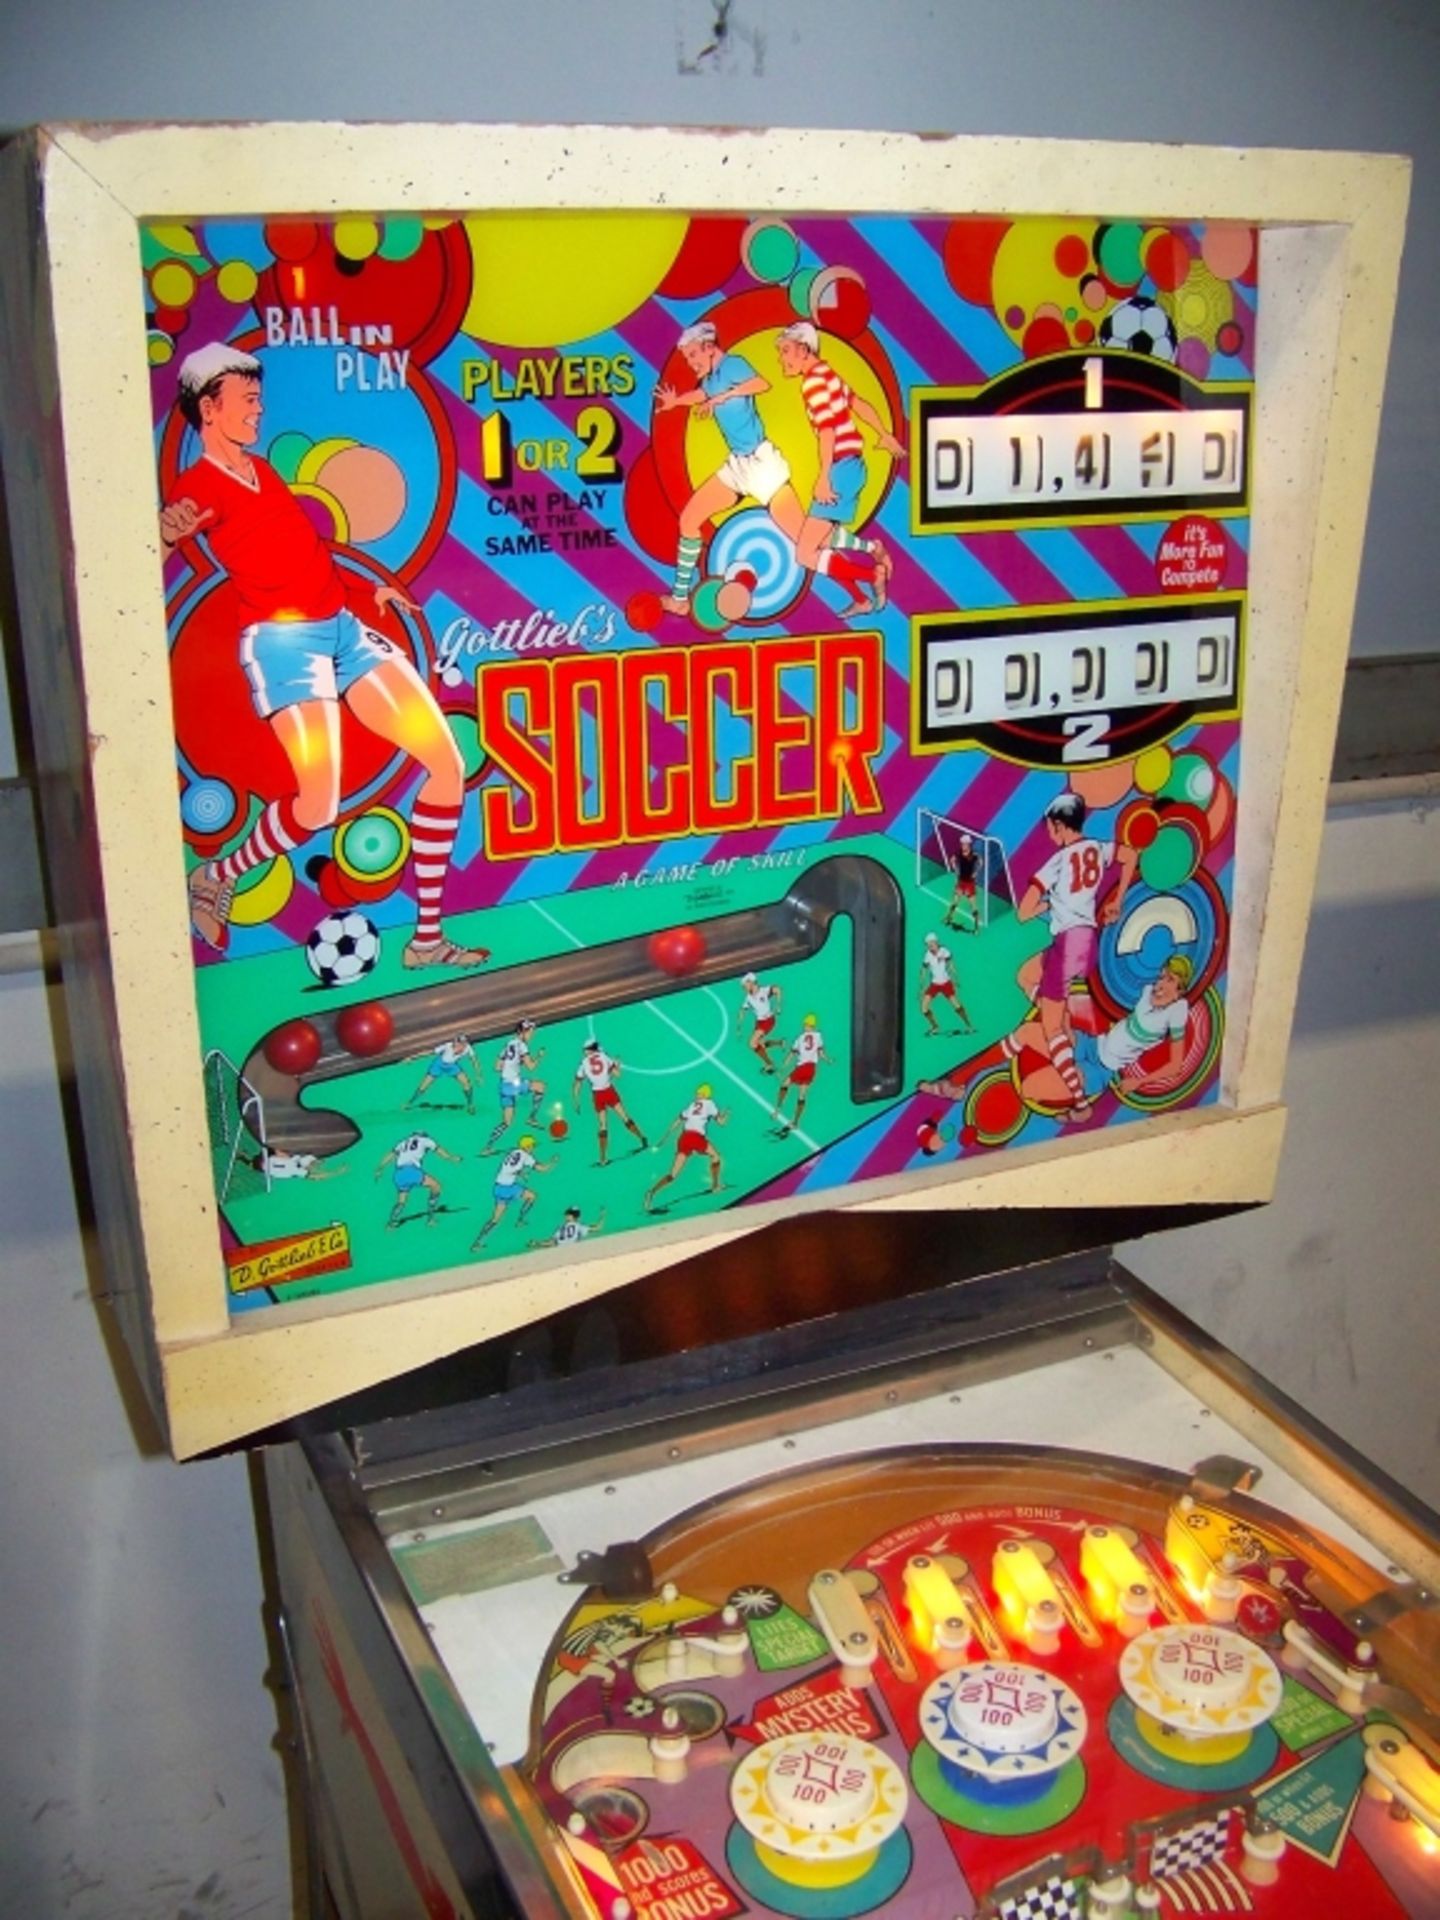 SOCCER PINBALL MACHINE ANIMATED BOX GOTTLIEB 1975 Item is in used condition. Evidence of wear and